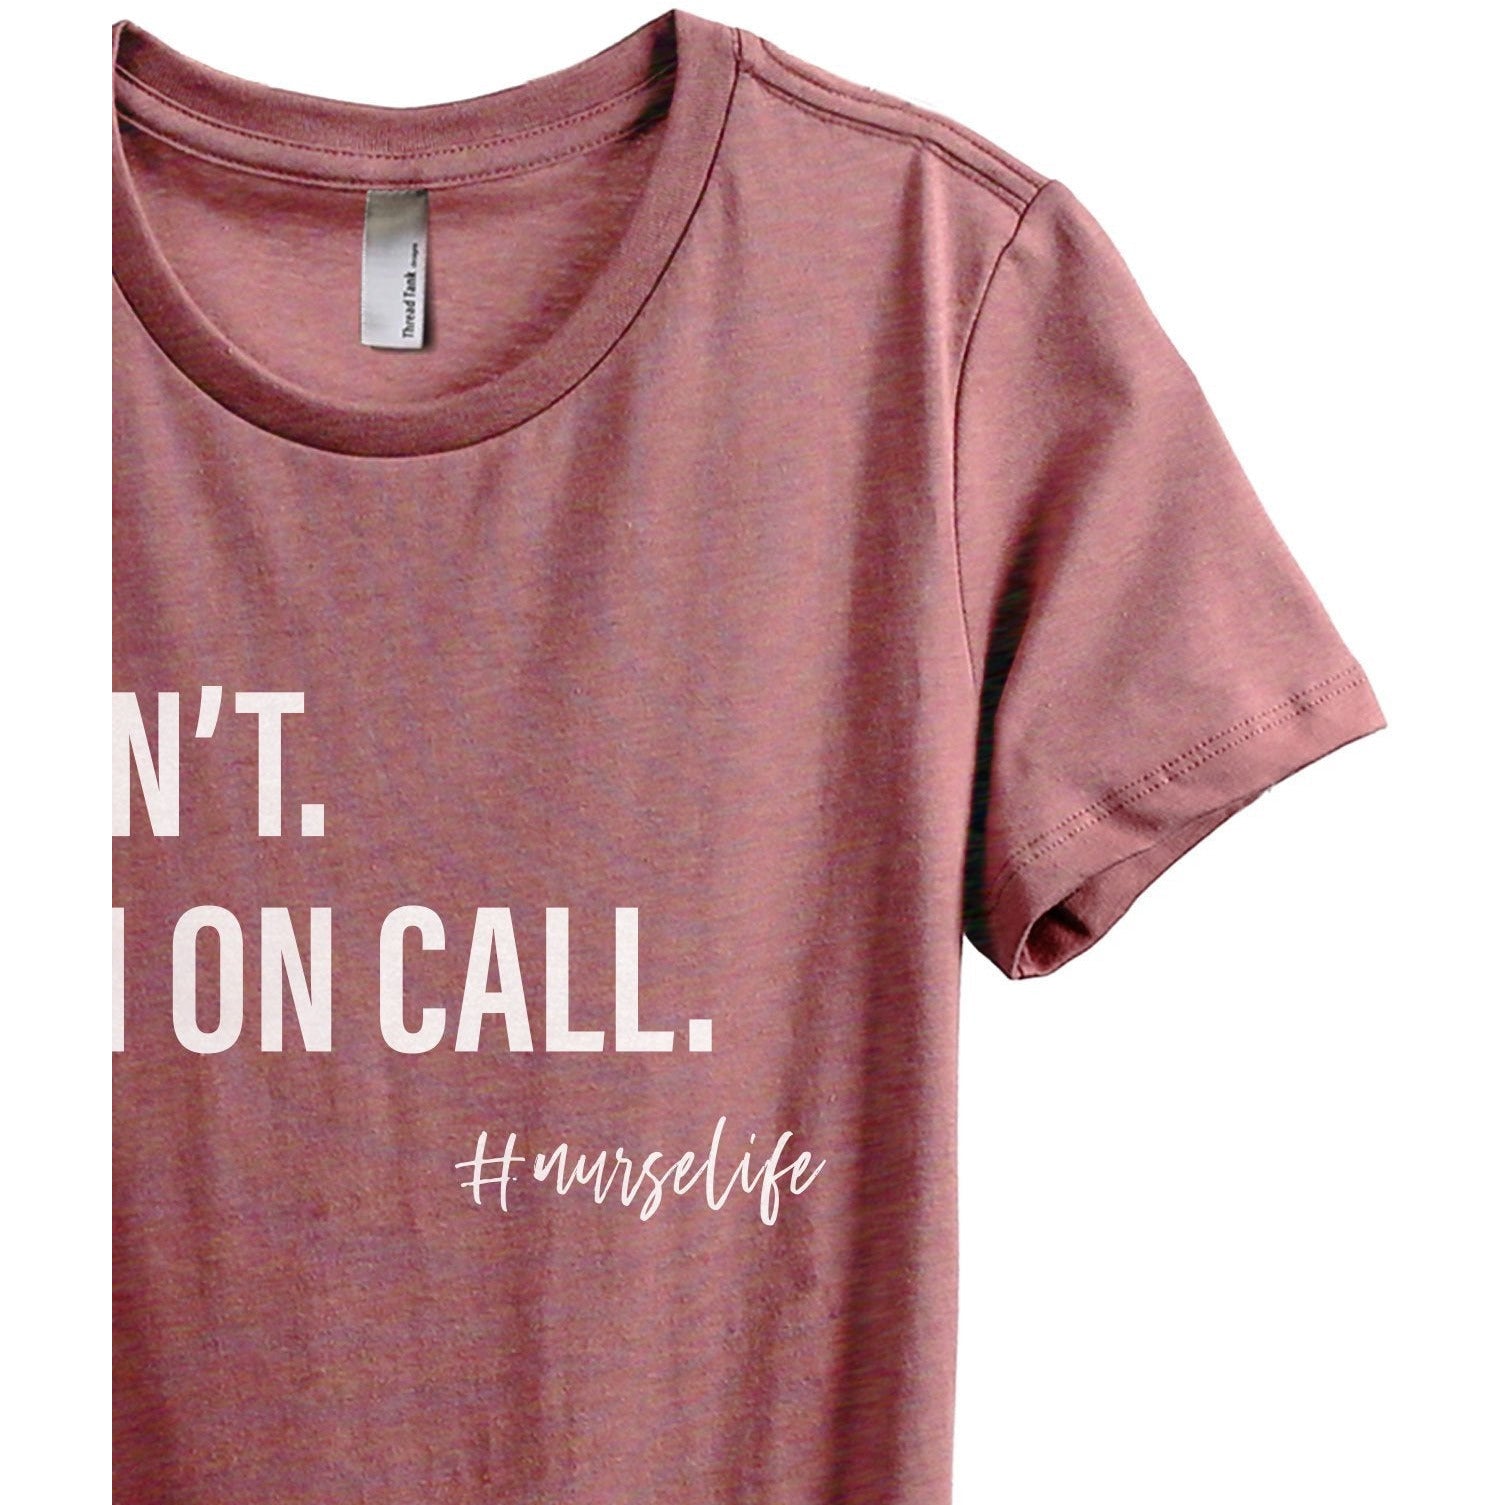 Can't I'm On Call Nurse Life Women's Relaxed Crewneck T-Shirt Top Tee Heather Rouge